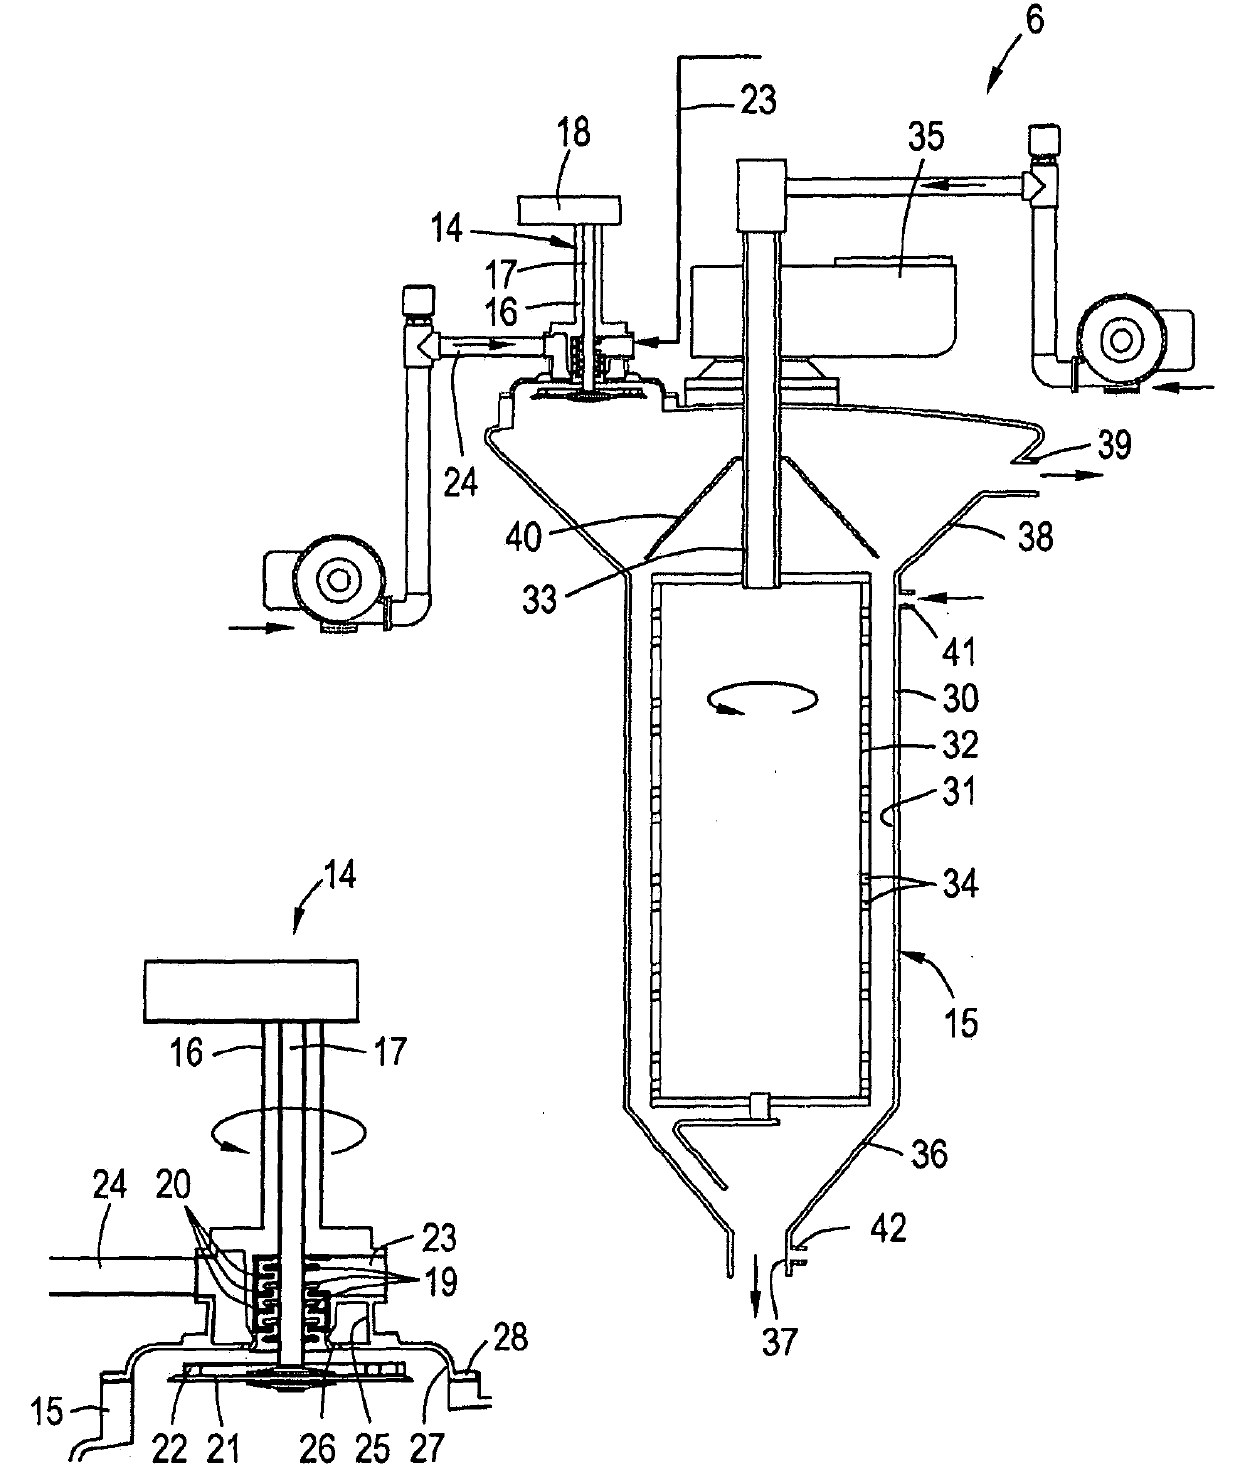 Device and process for conching edible mass